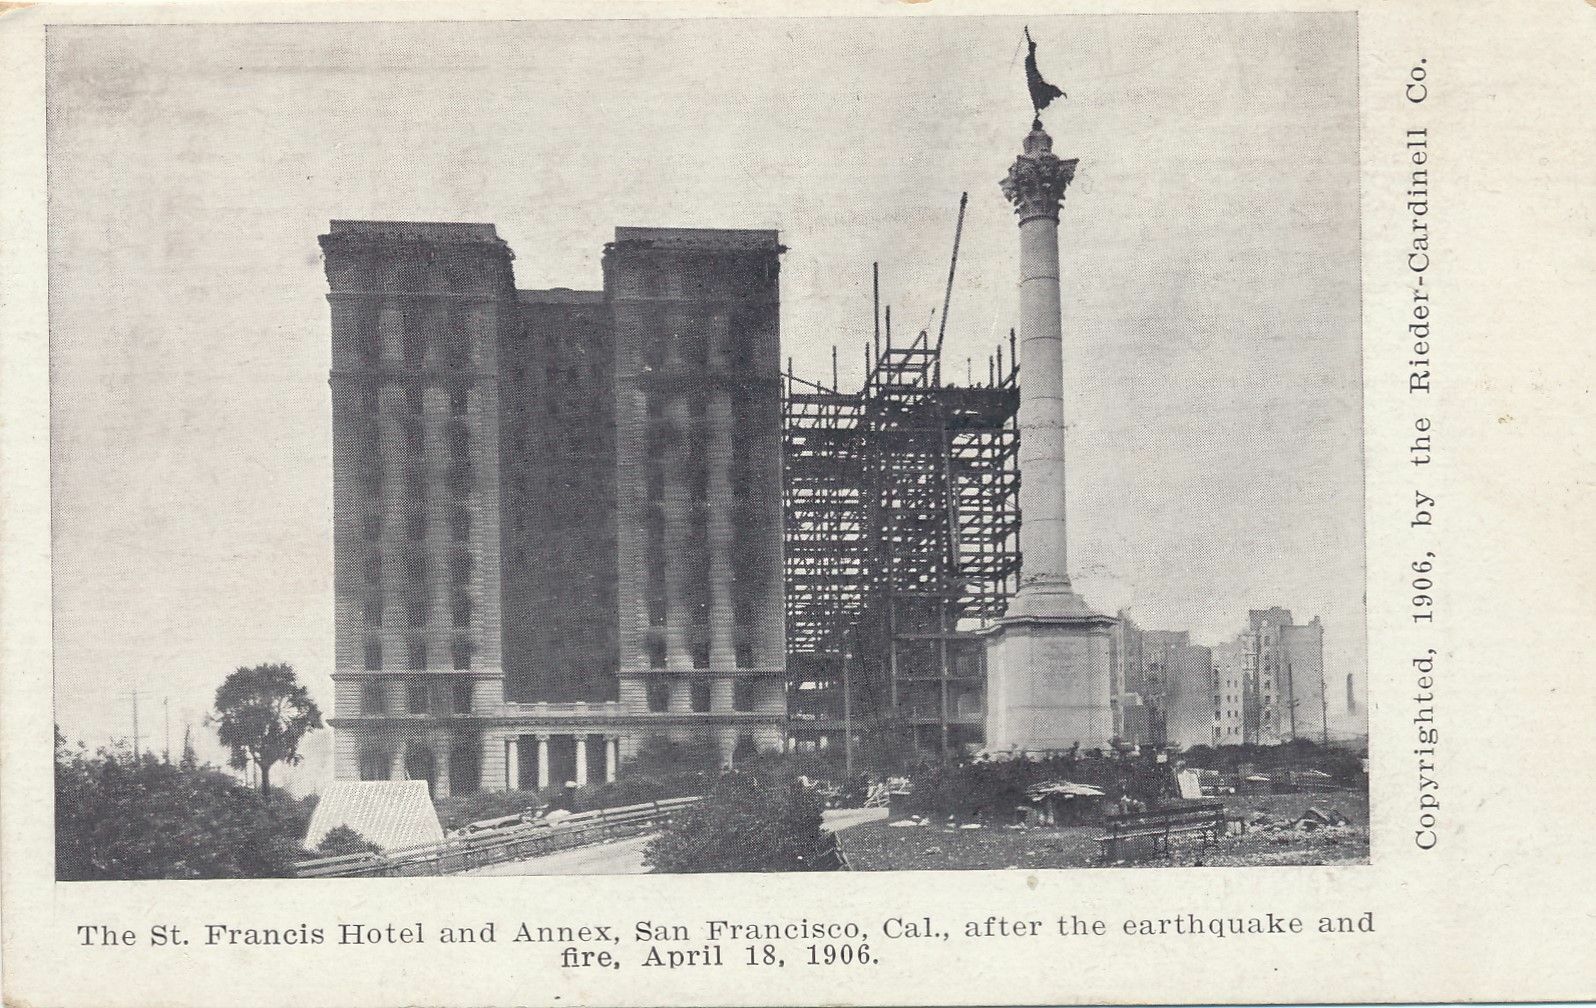 SAN FRANCISCO CA - The St. Francis Hotel and Annex After 1906 Earthquake - udb